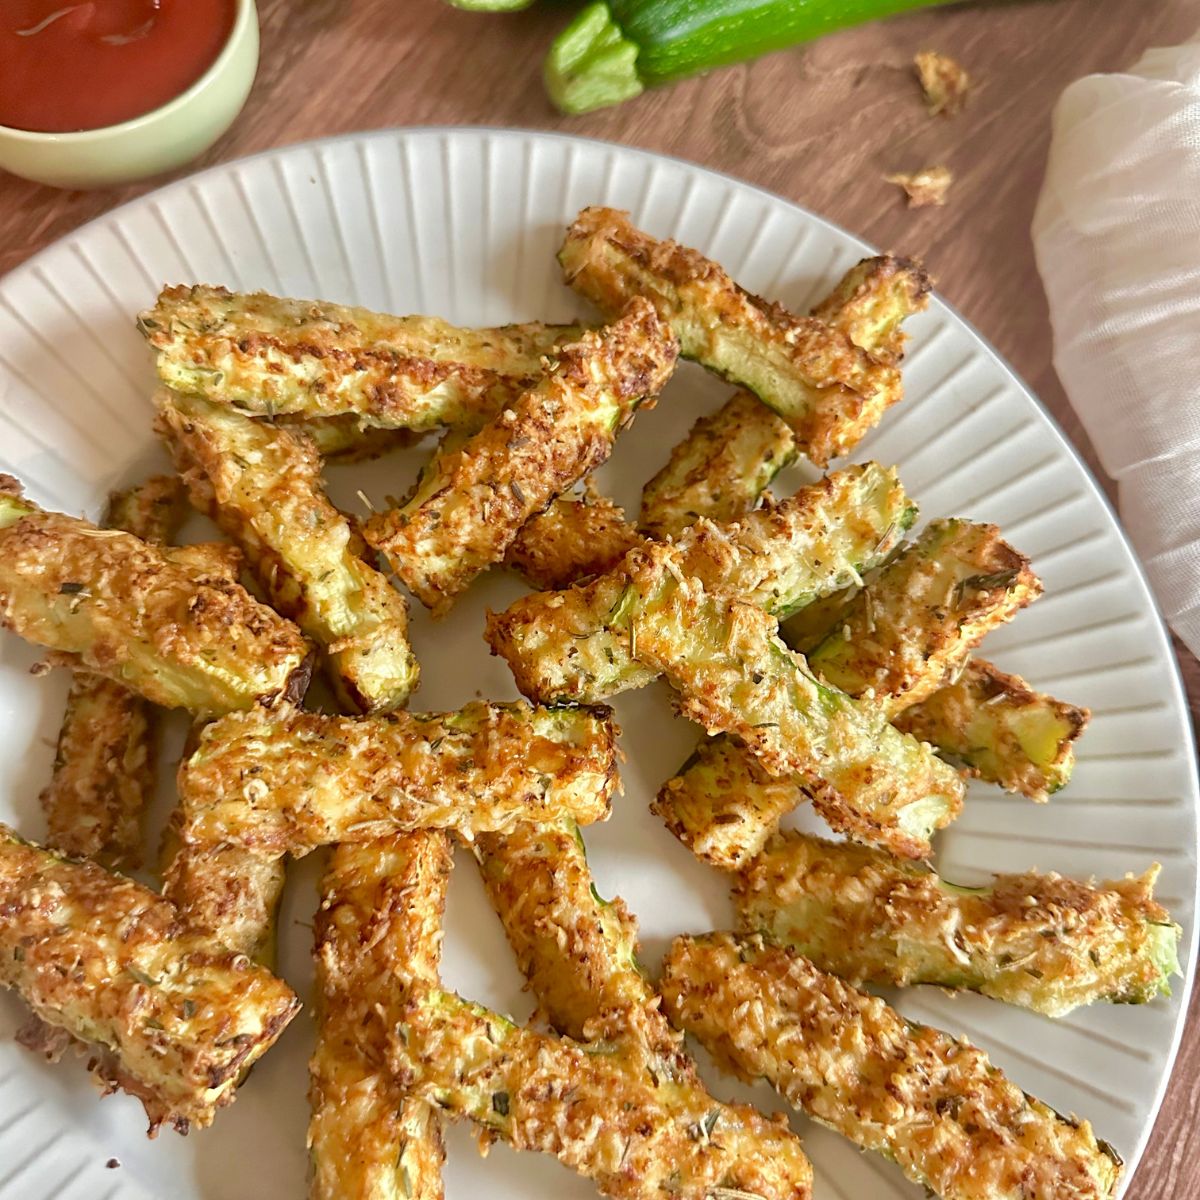 a plate of zucchini fries with a small dish of ketchup off to the side.